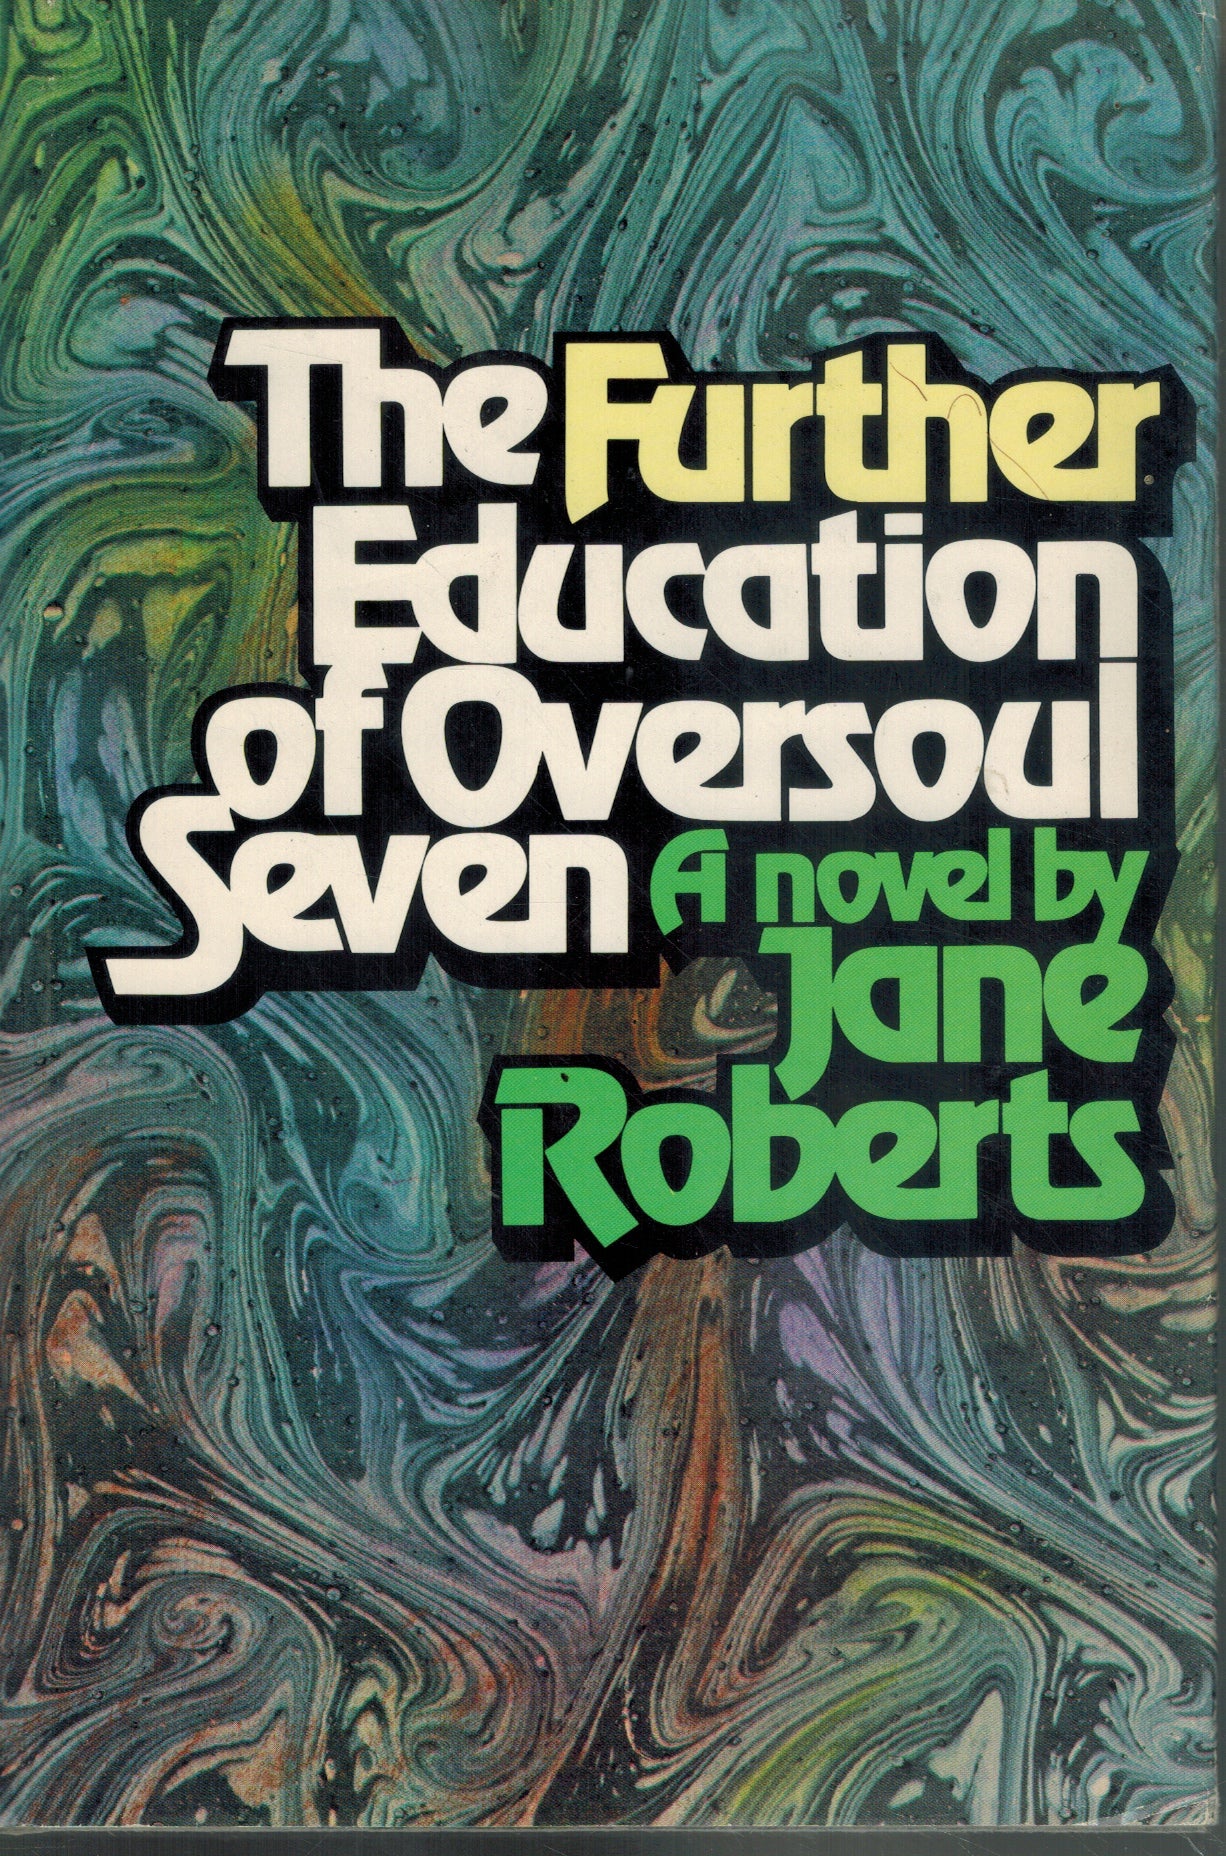 THE FURTHER EDUCATION OF OVERSOUL SEVEN